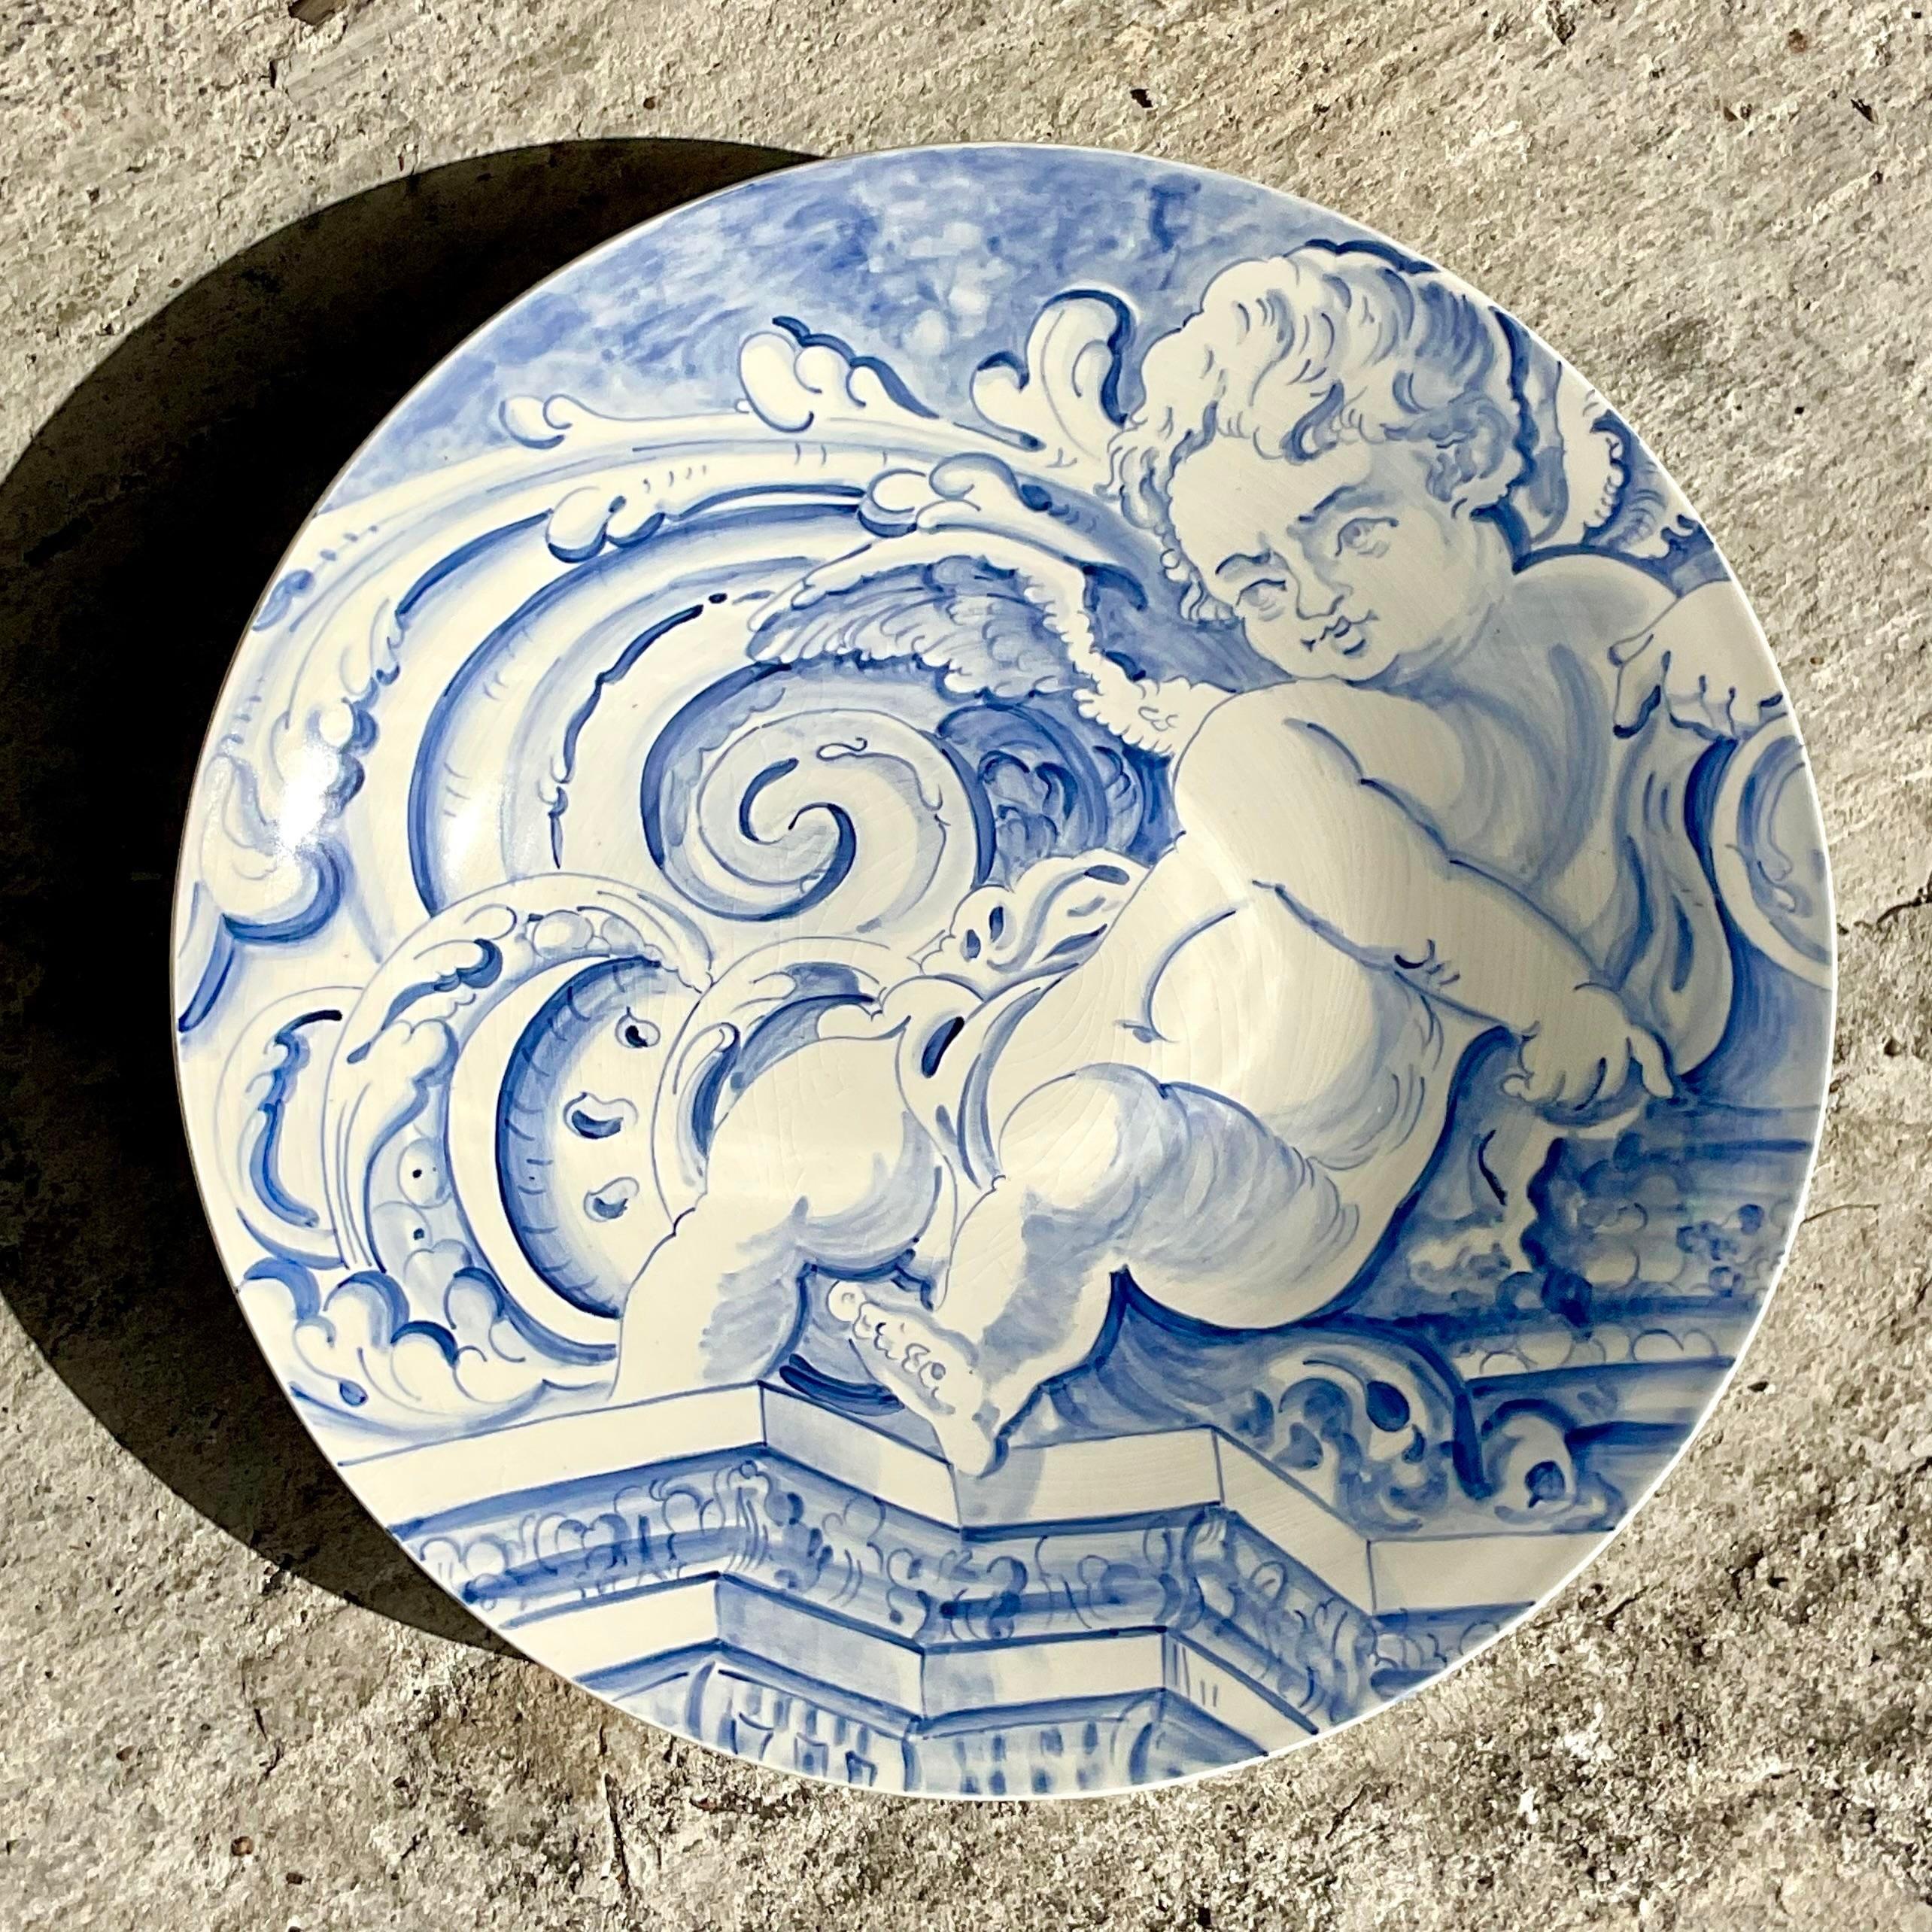 A fantastic vintage Regency decorative plate. A fabulous hand painted cherub in an iconic blue and white design. Made and signed by the artist Robert Walters